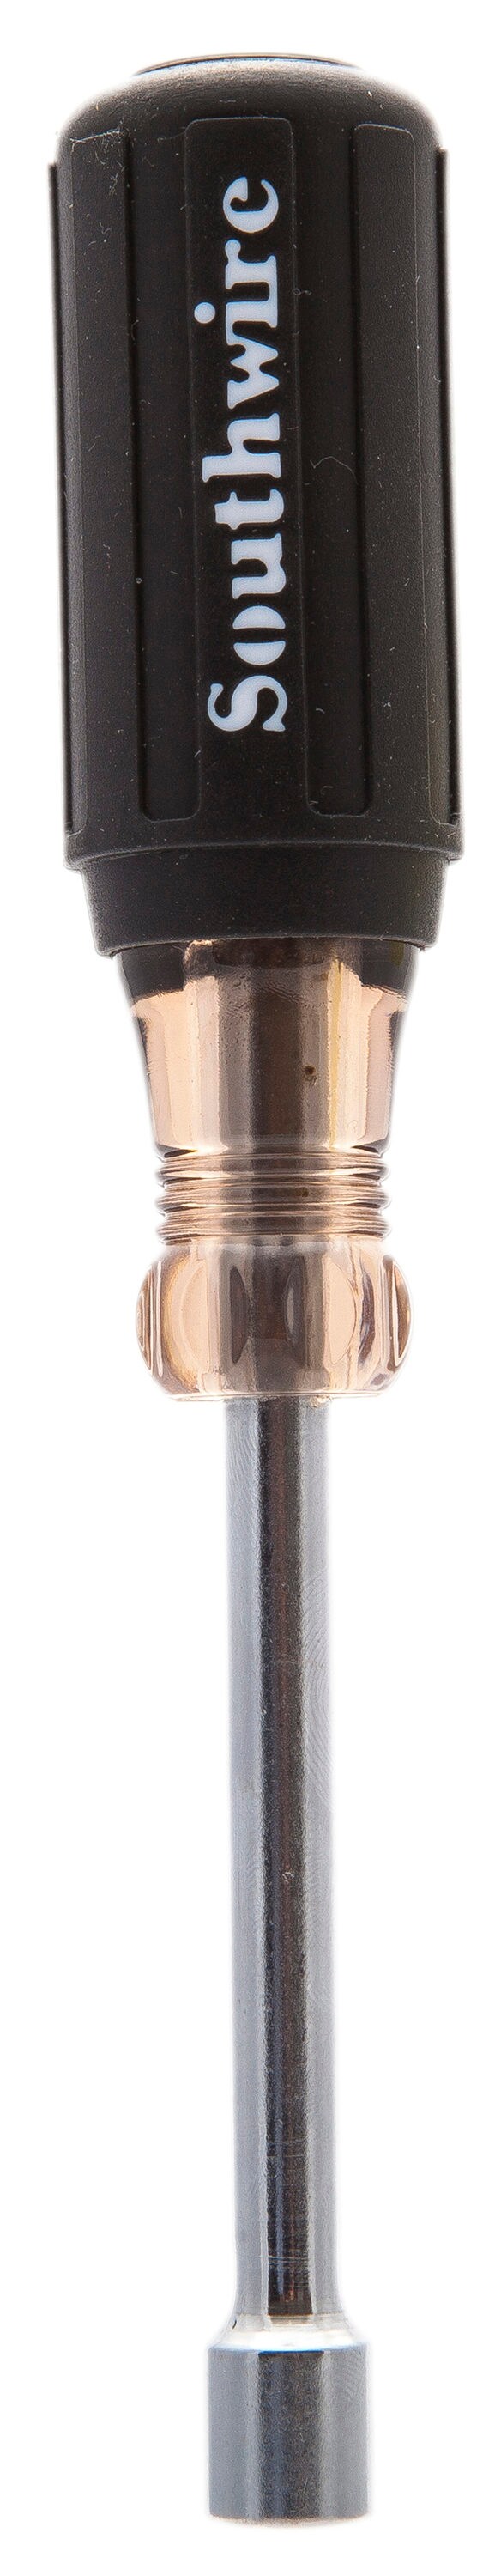 Southwire 6-Inch Hollow Shanx 9/16 Socket in the Nut Drivers 